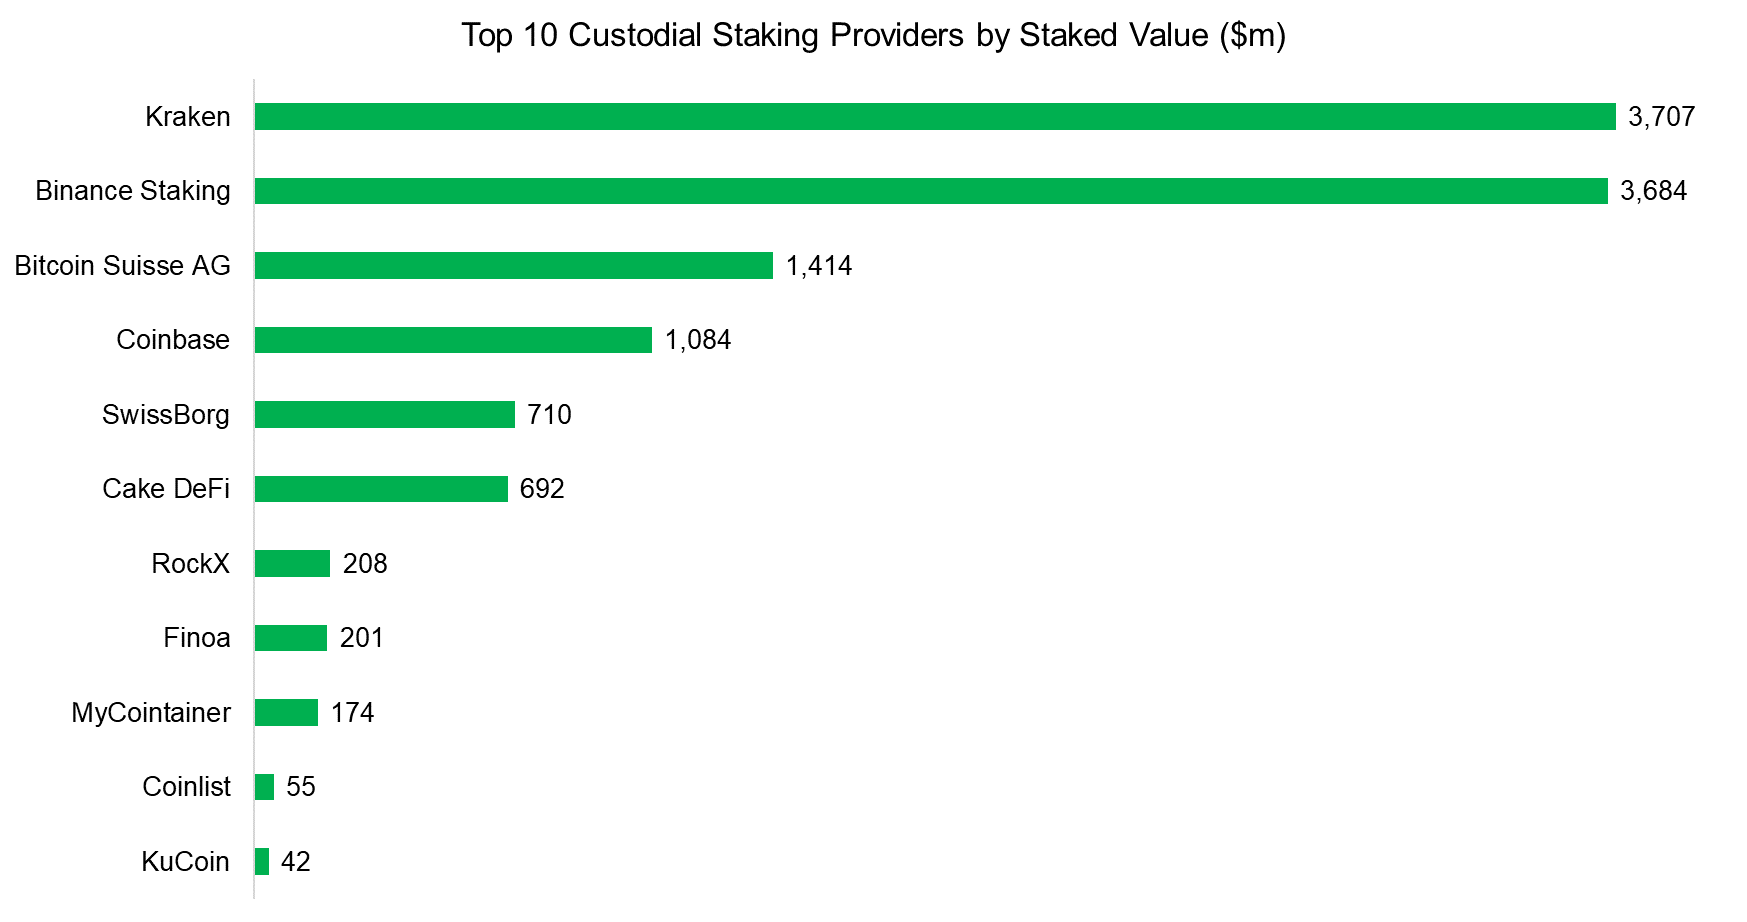 Top 10 Custodial Staking Providers by Staked Value ($m)